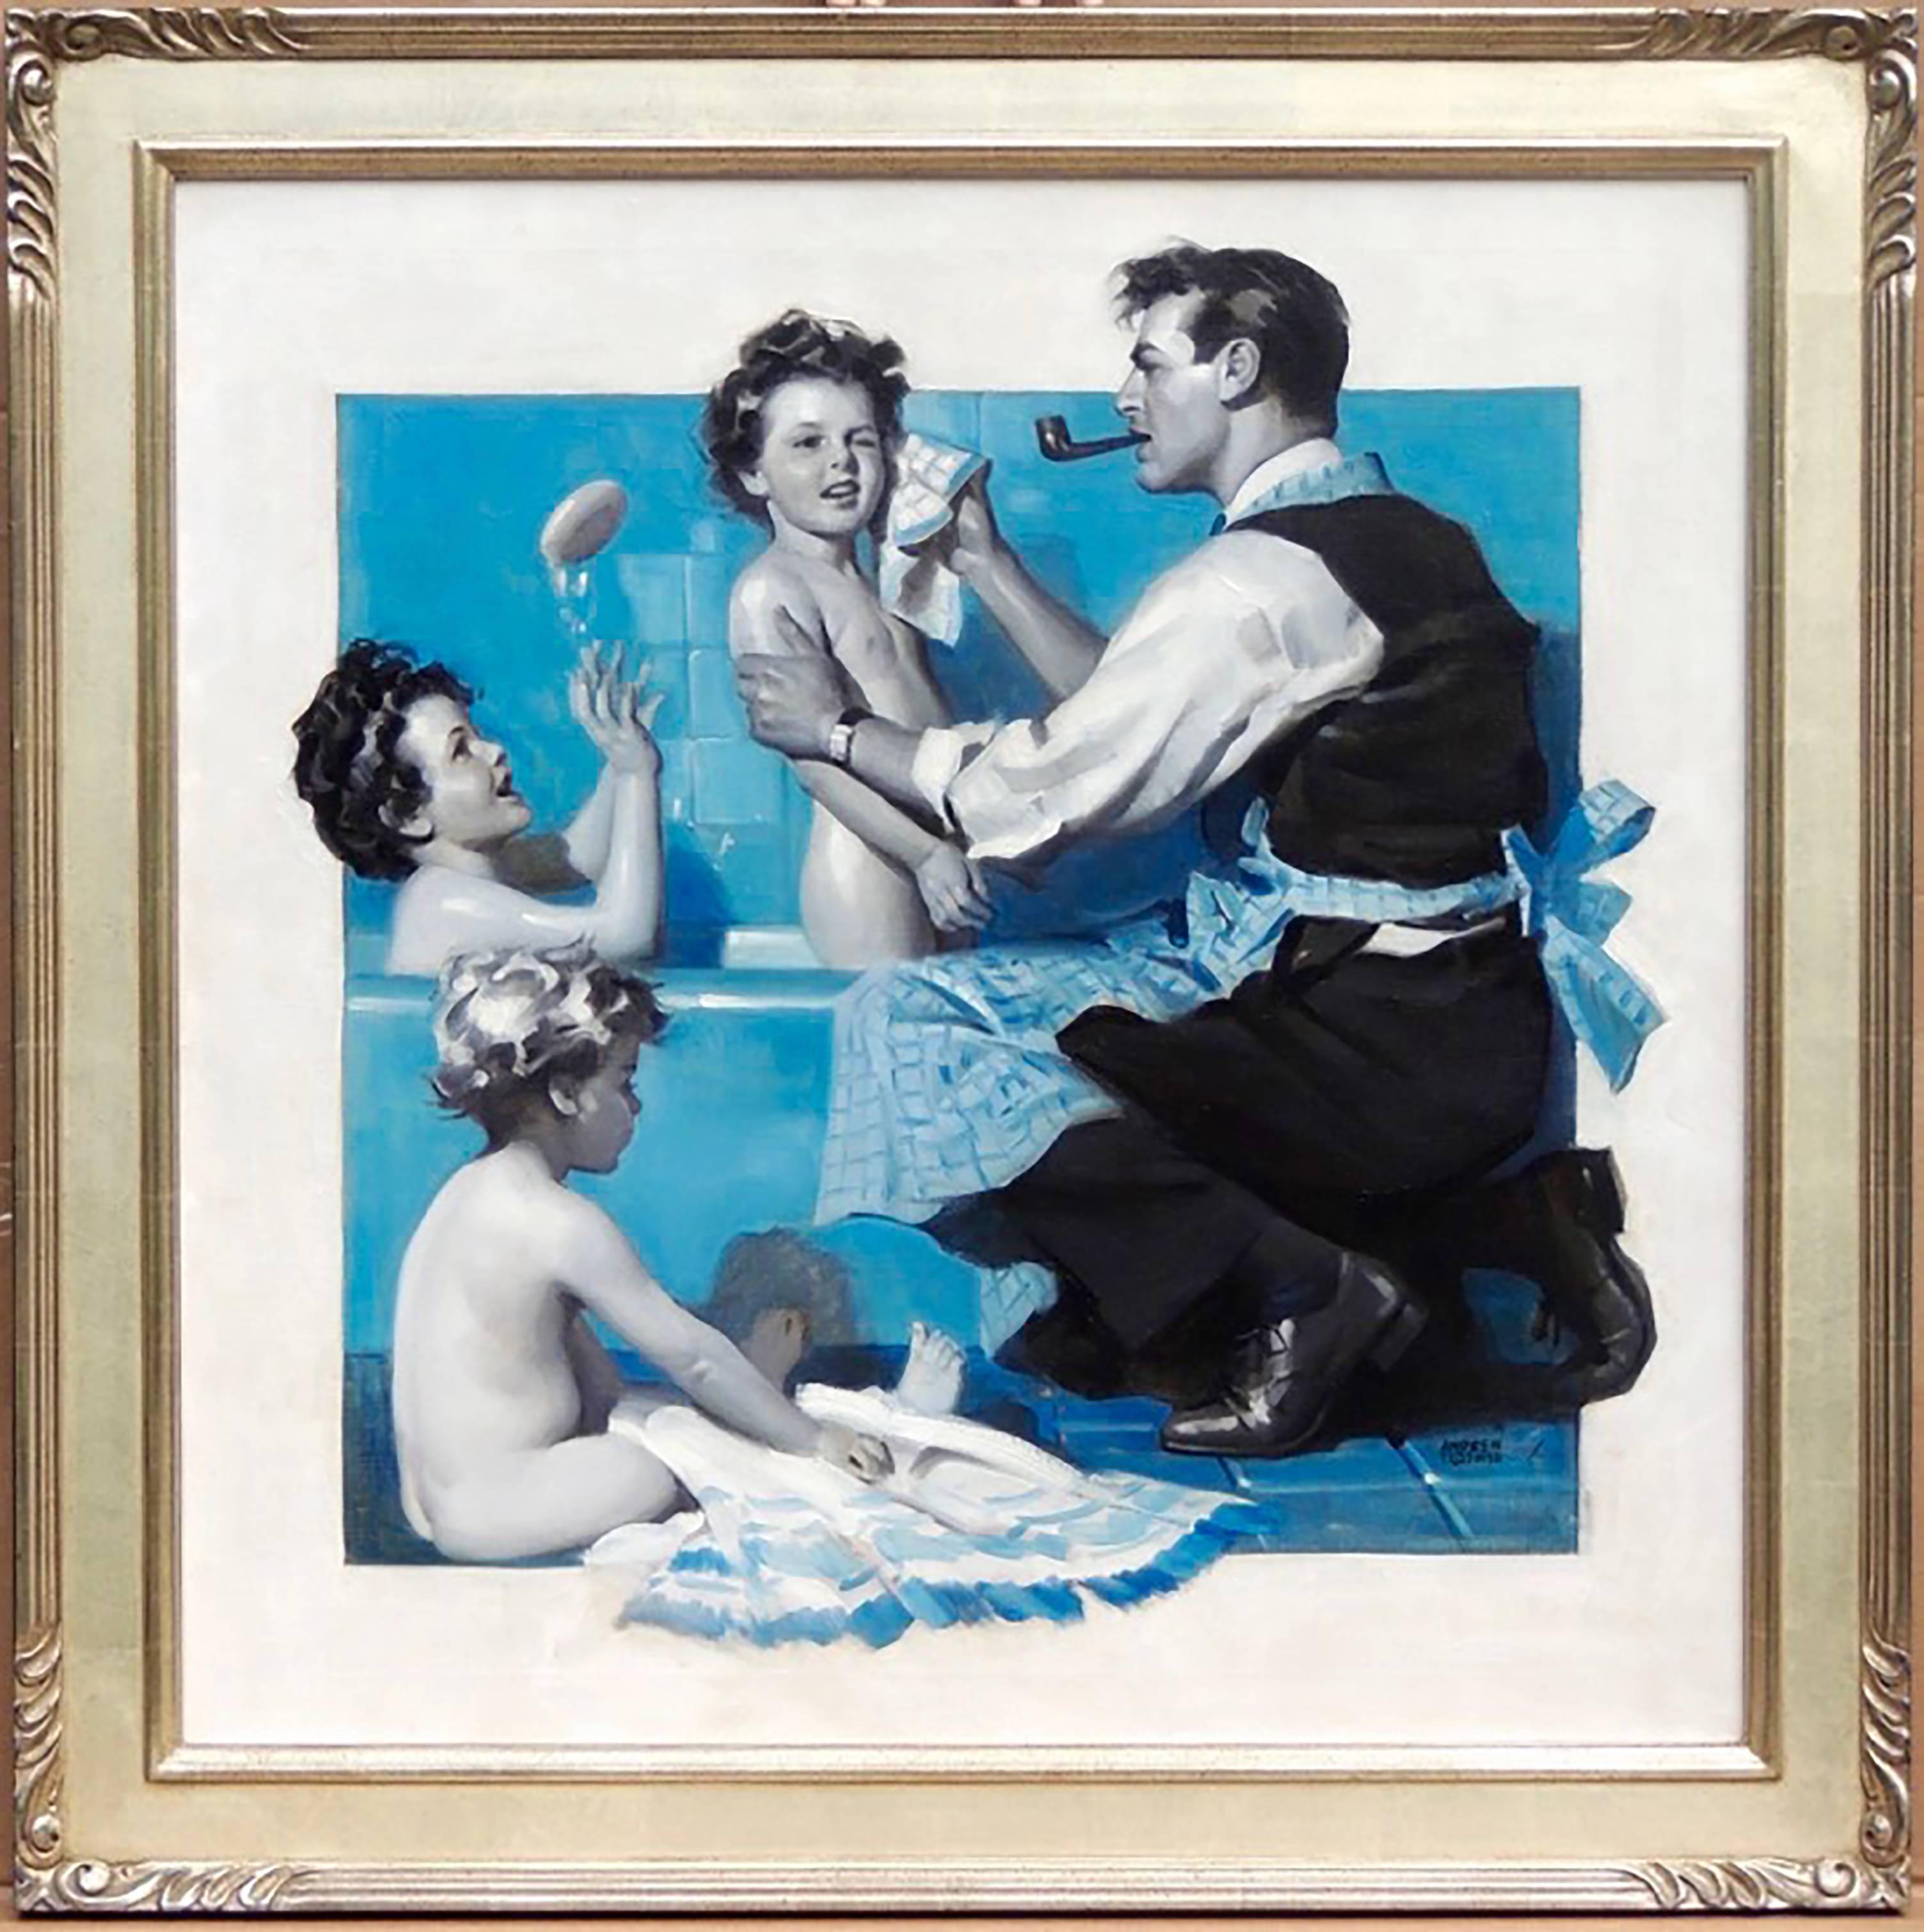 Family Man - Painting by Andrew Loomis